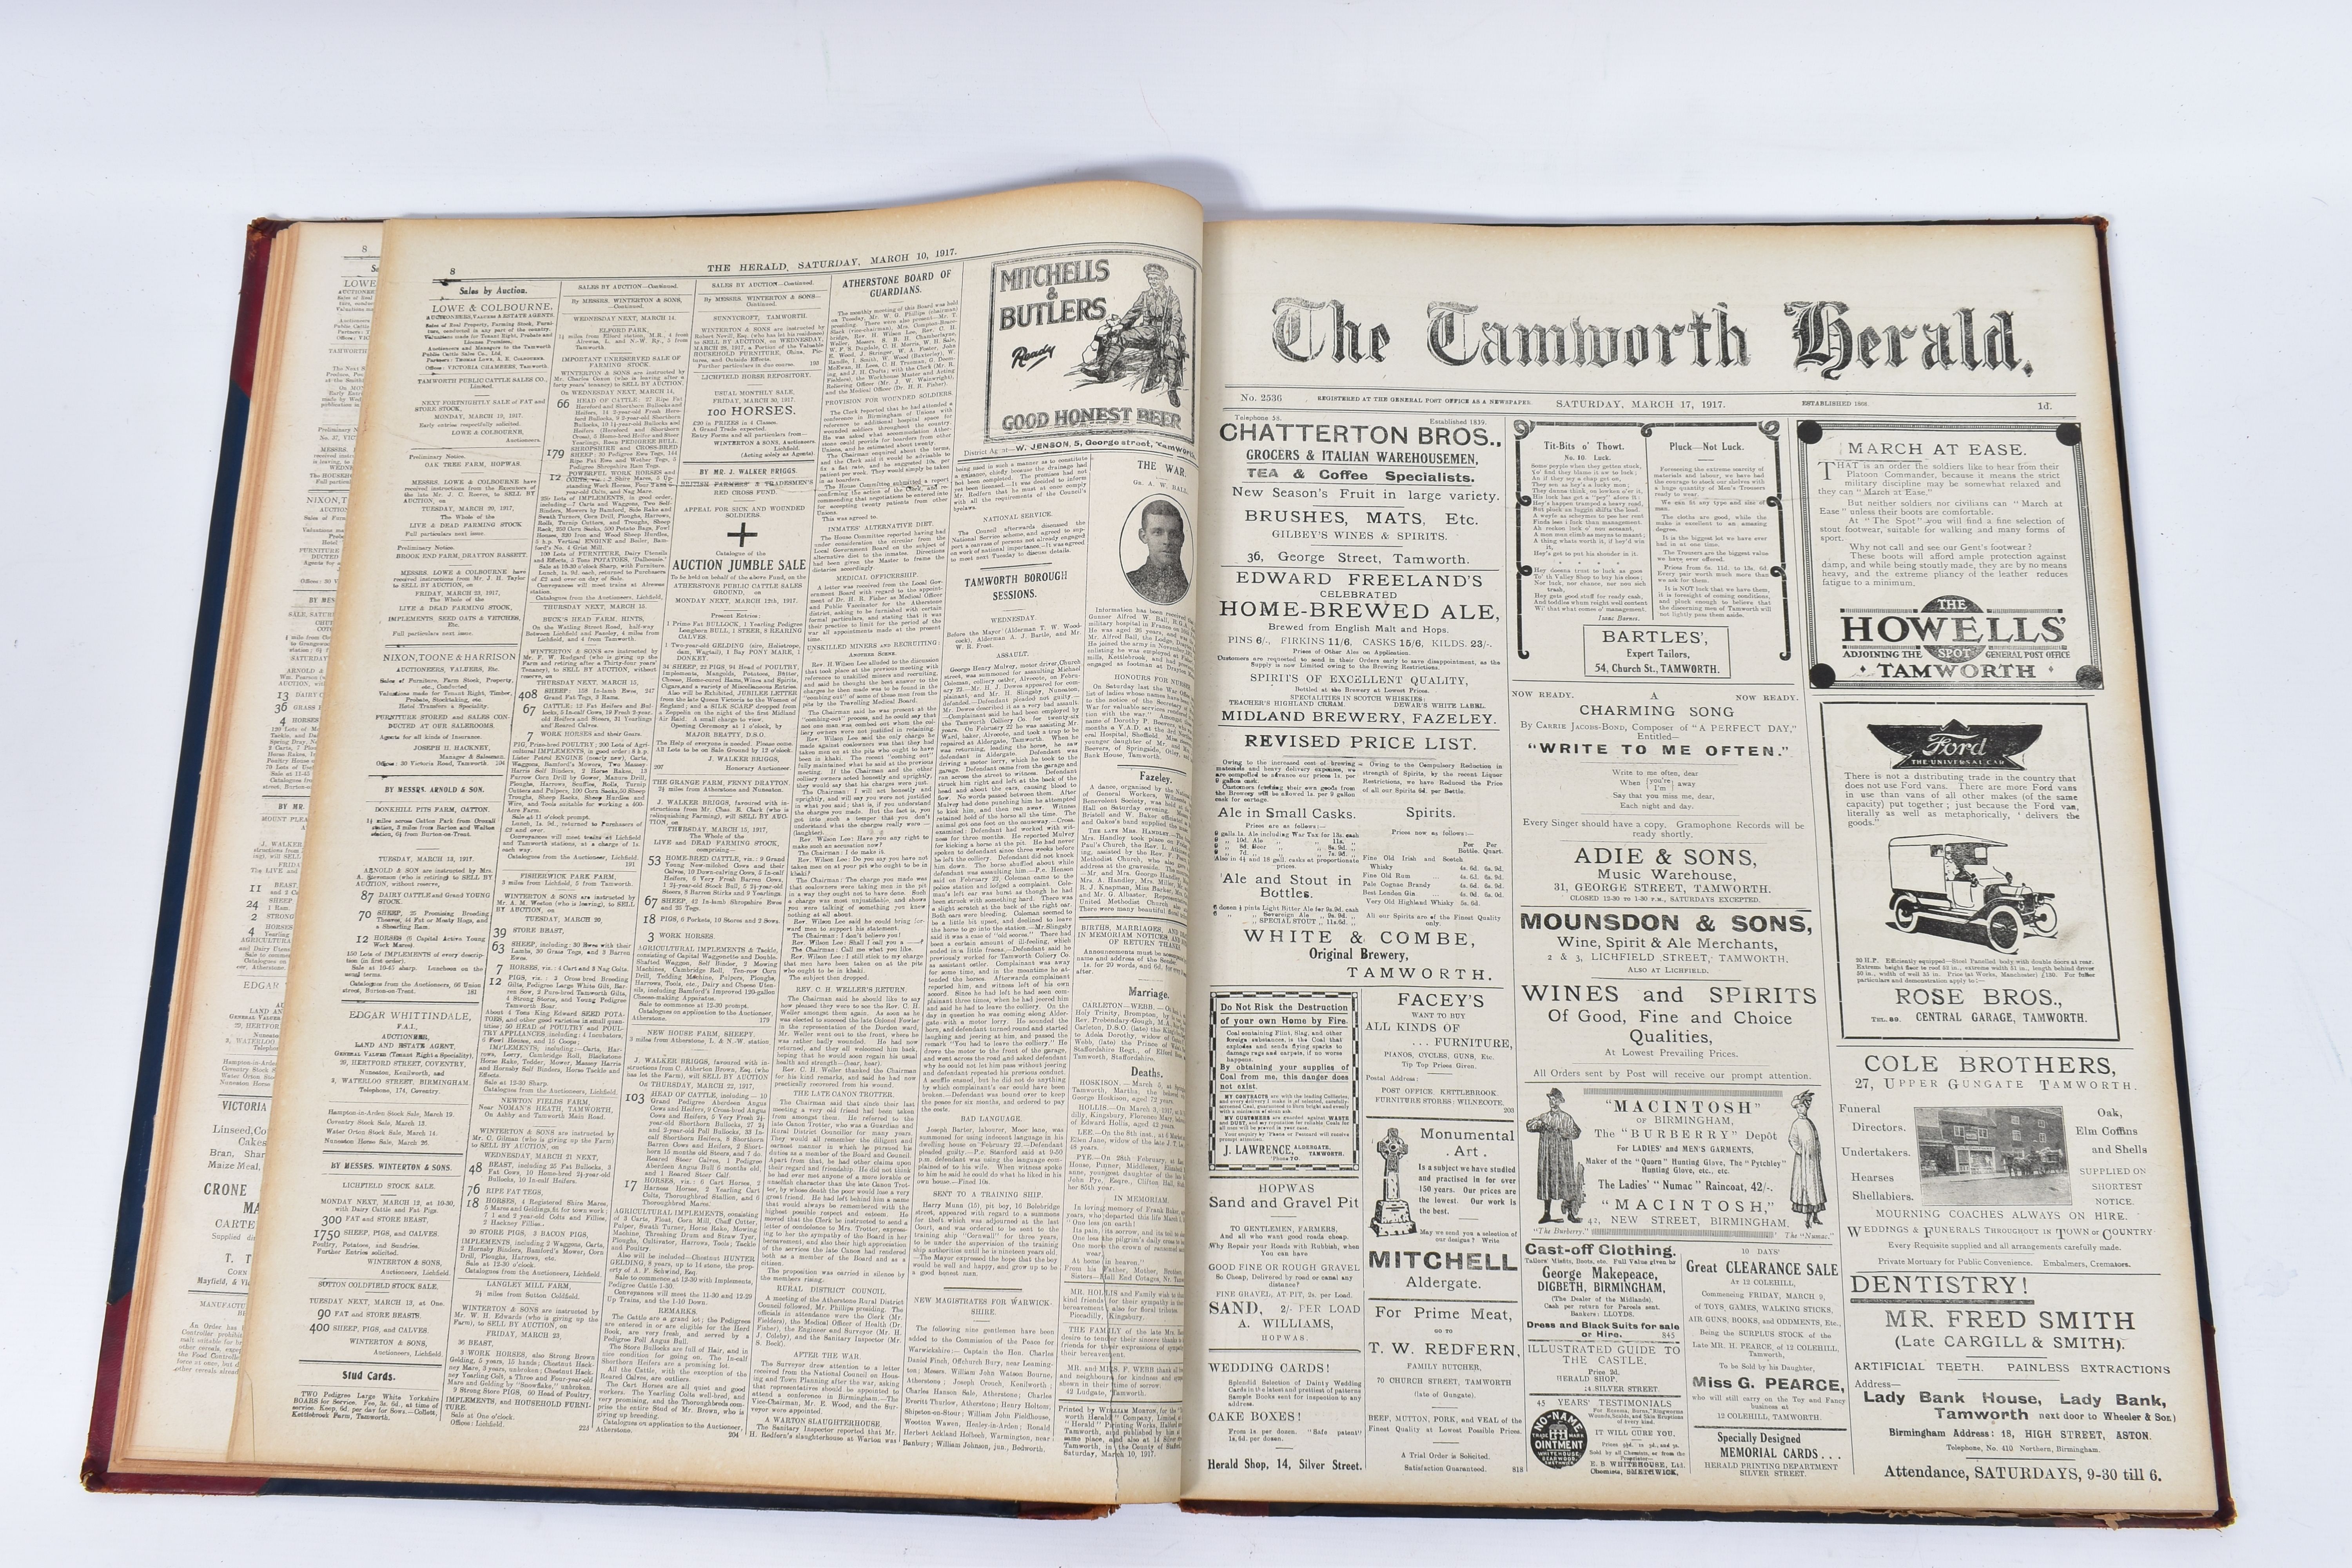 THE TAMWORTH HERALD, an Archive of the Tamworth Herald Newspaper from 1917, the newspapers are bound - Image 4 of 7